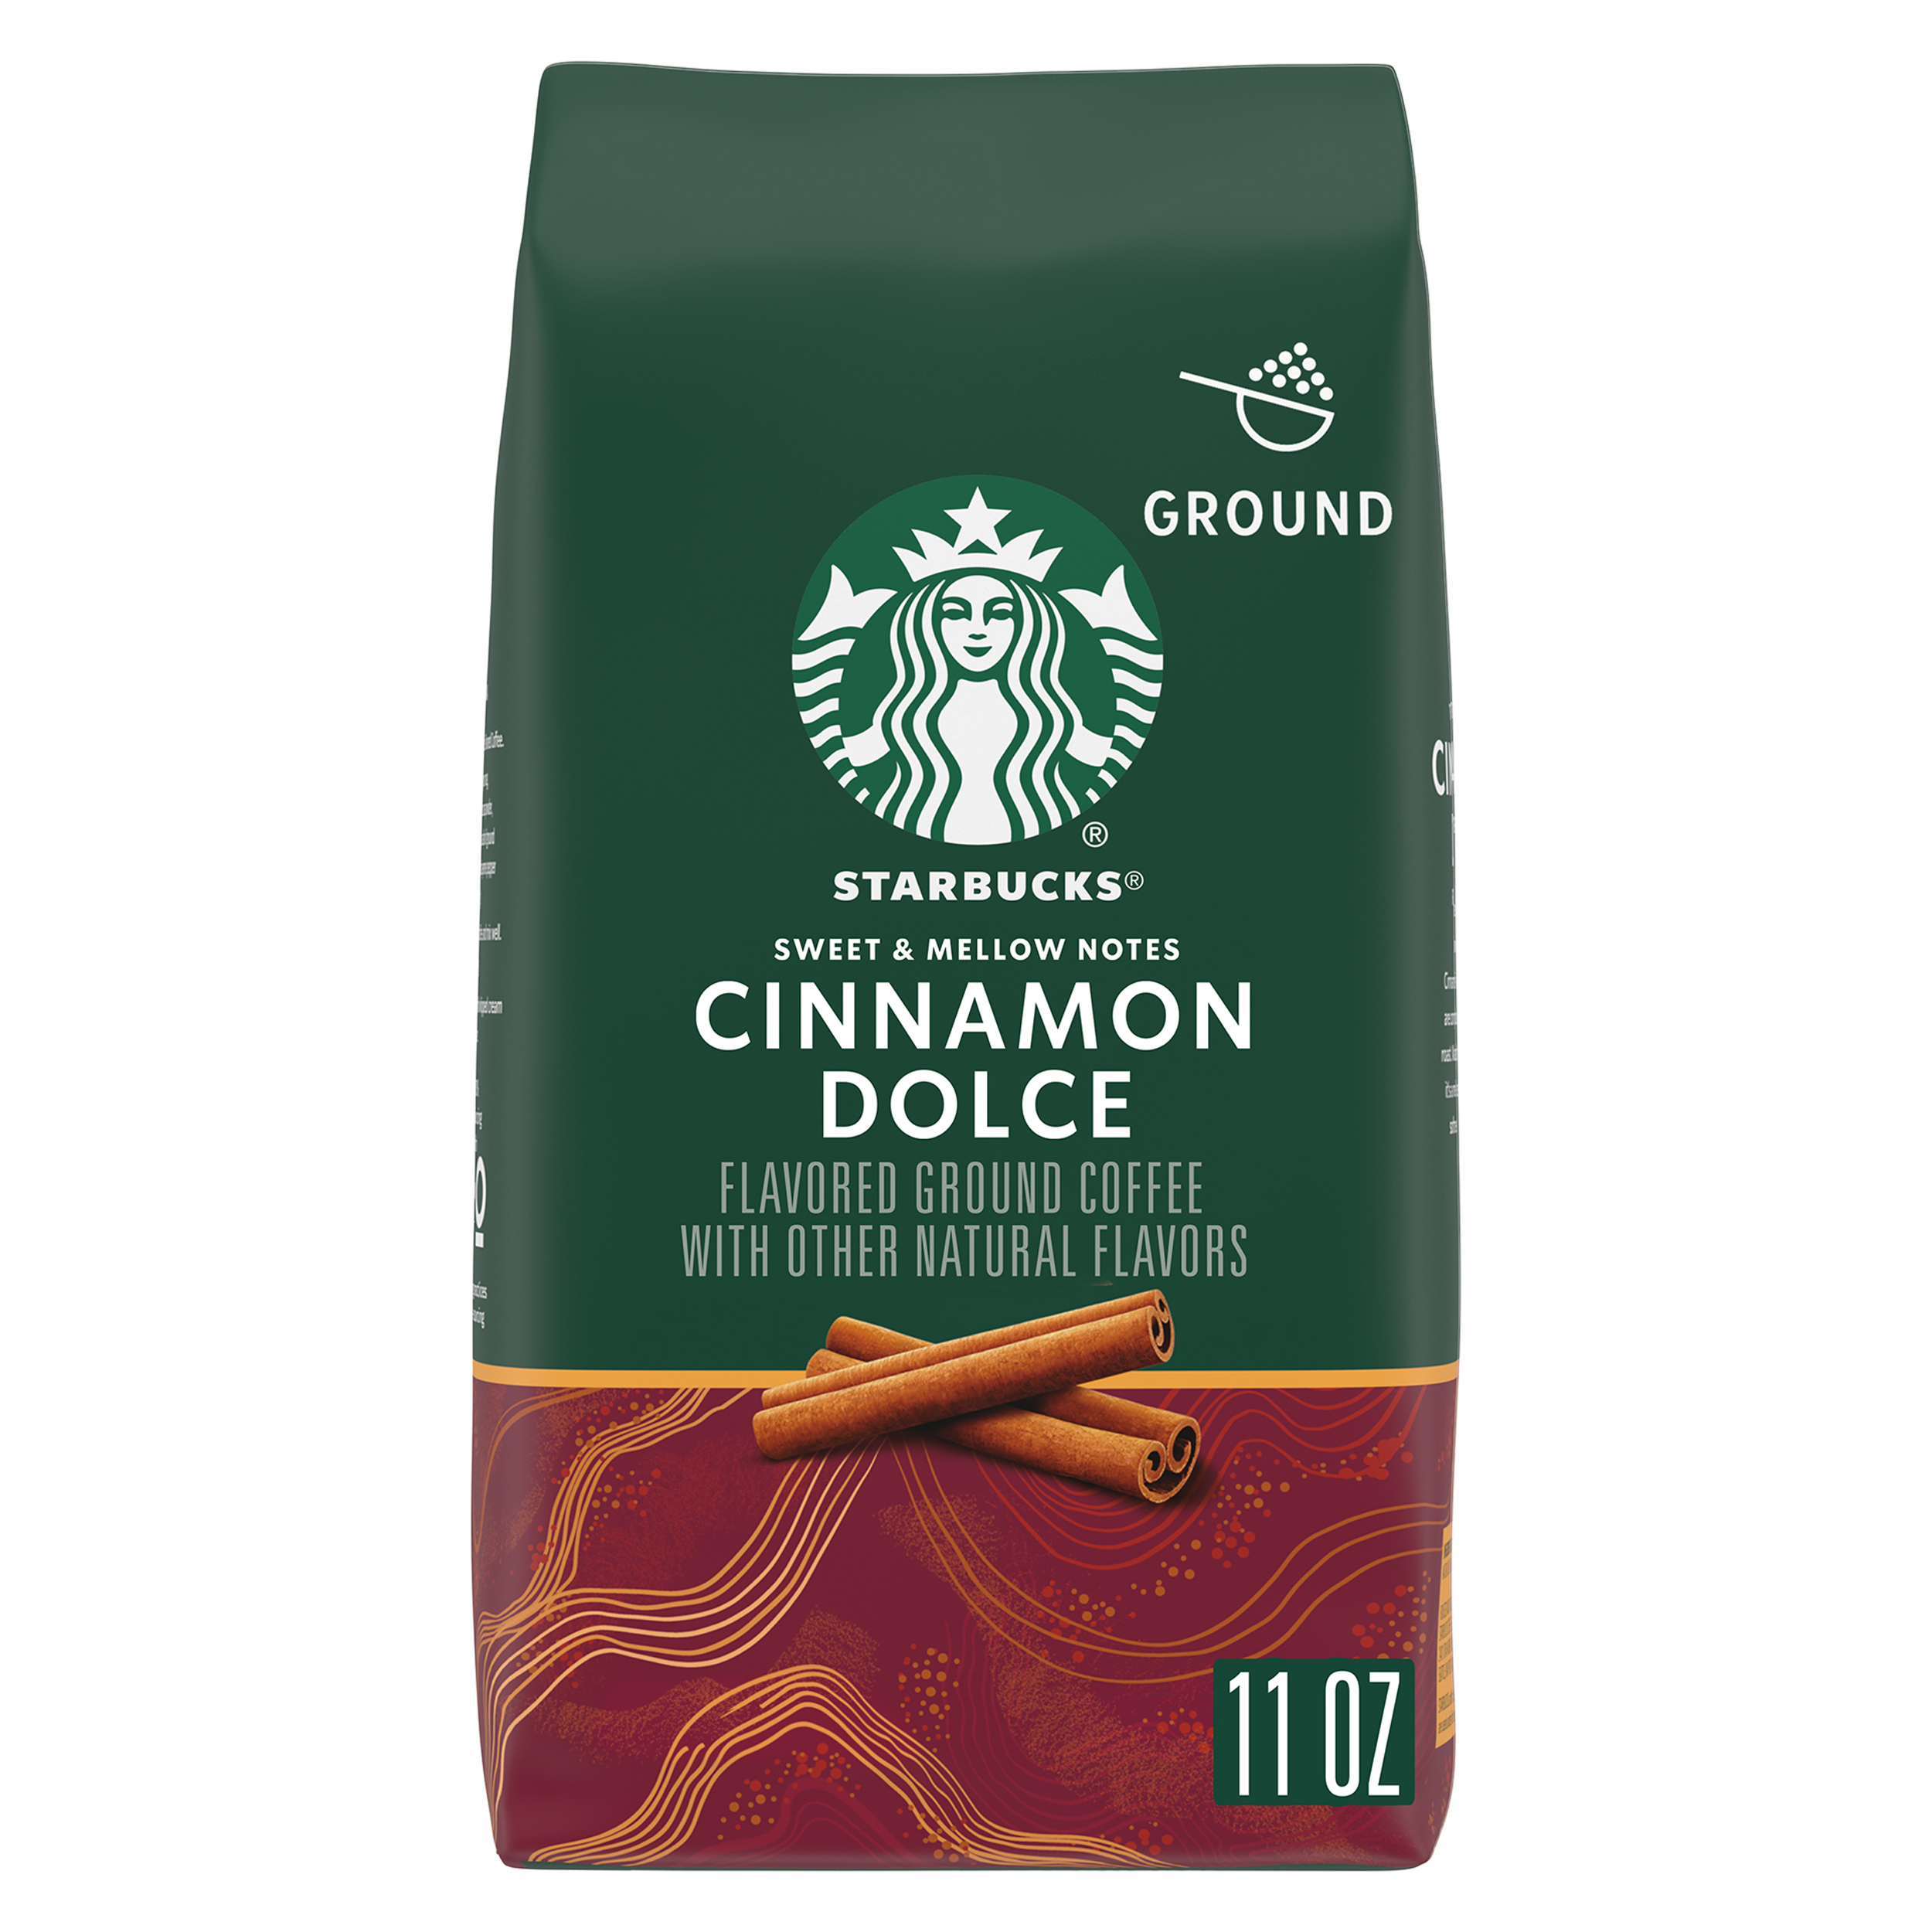 Starbucks Arabica Beans Cinnamon Dolce, Naturally Flavored, Ground Coffee, 11 oz - image 1 of 8